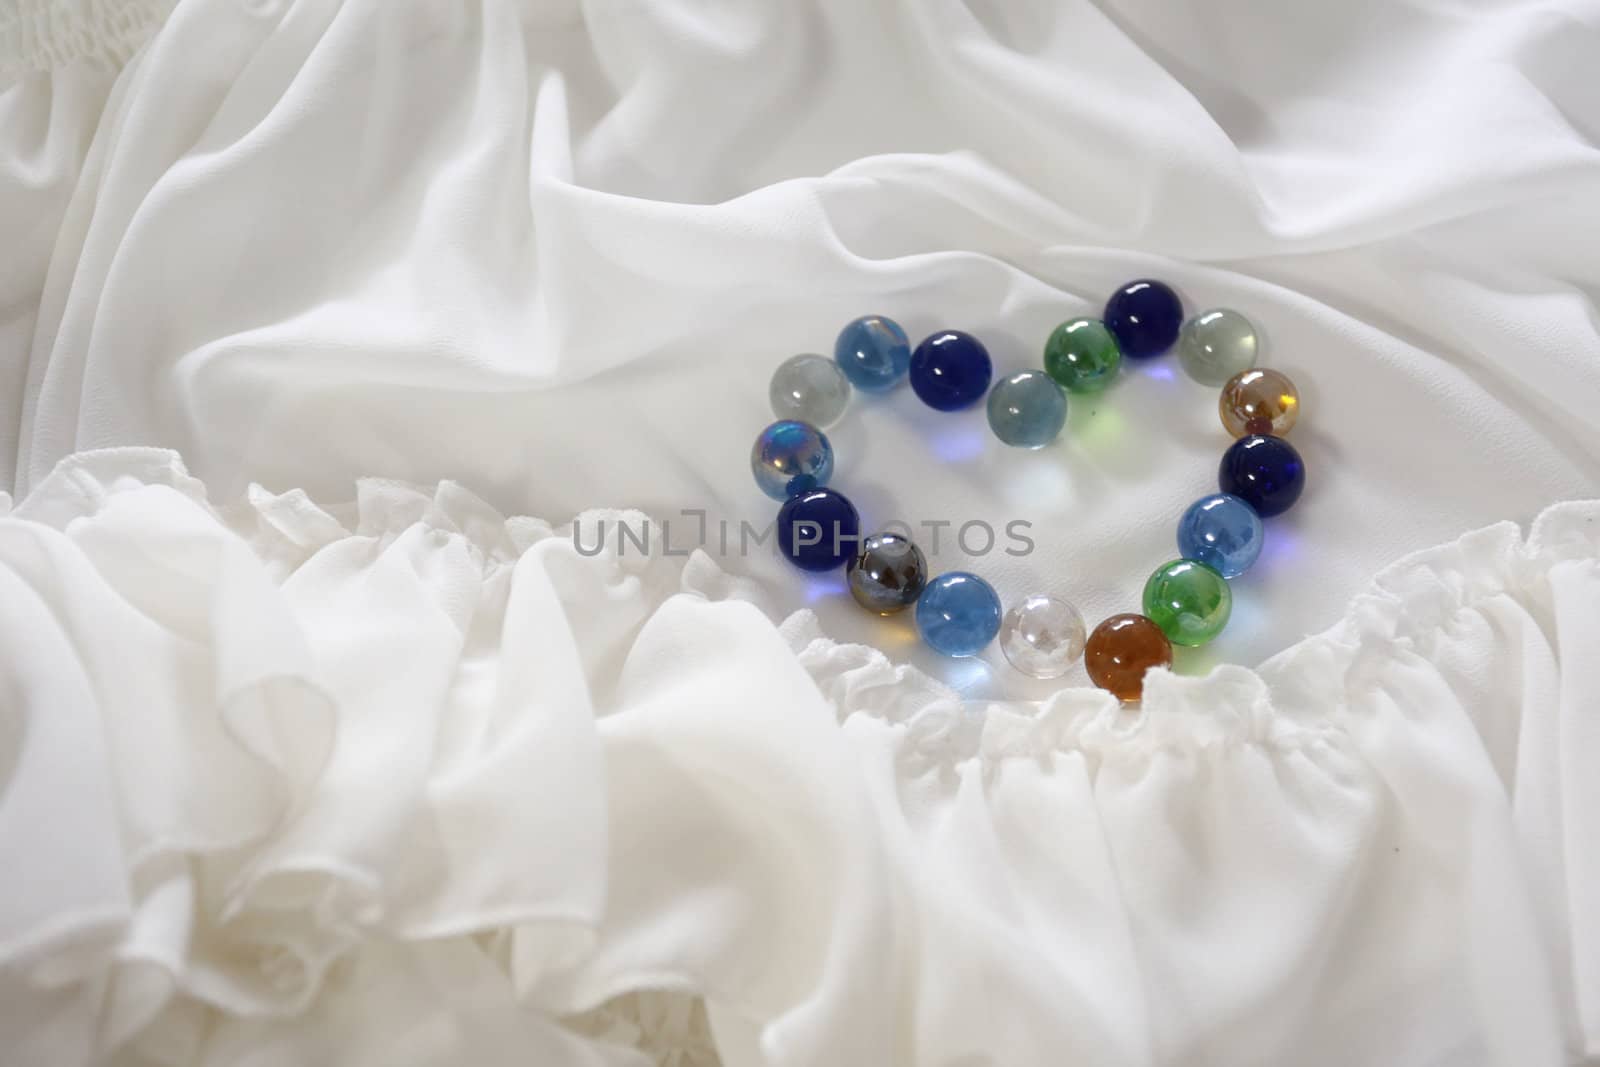 There are many glass balls are arrange be the "Heart" on the part of bridal gown.